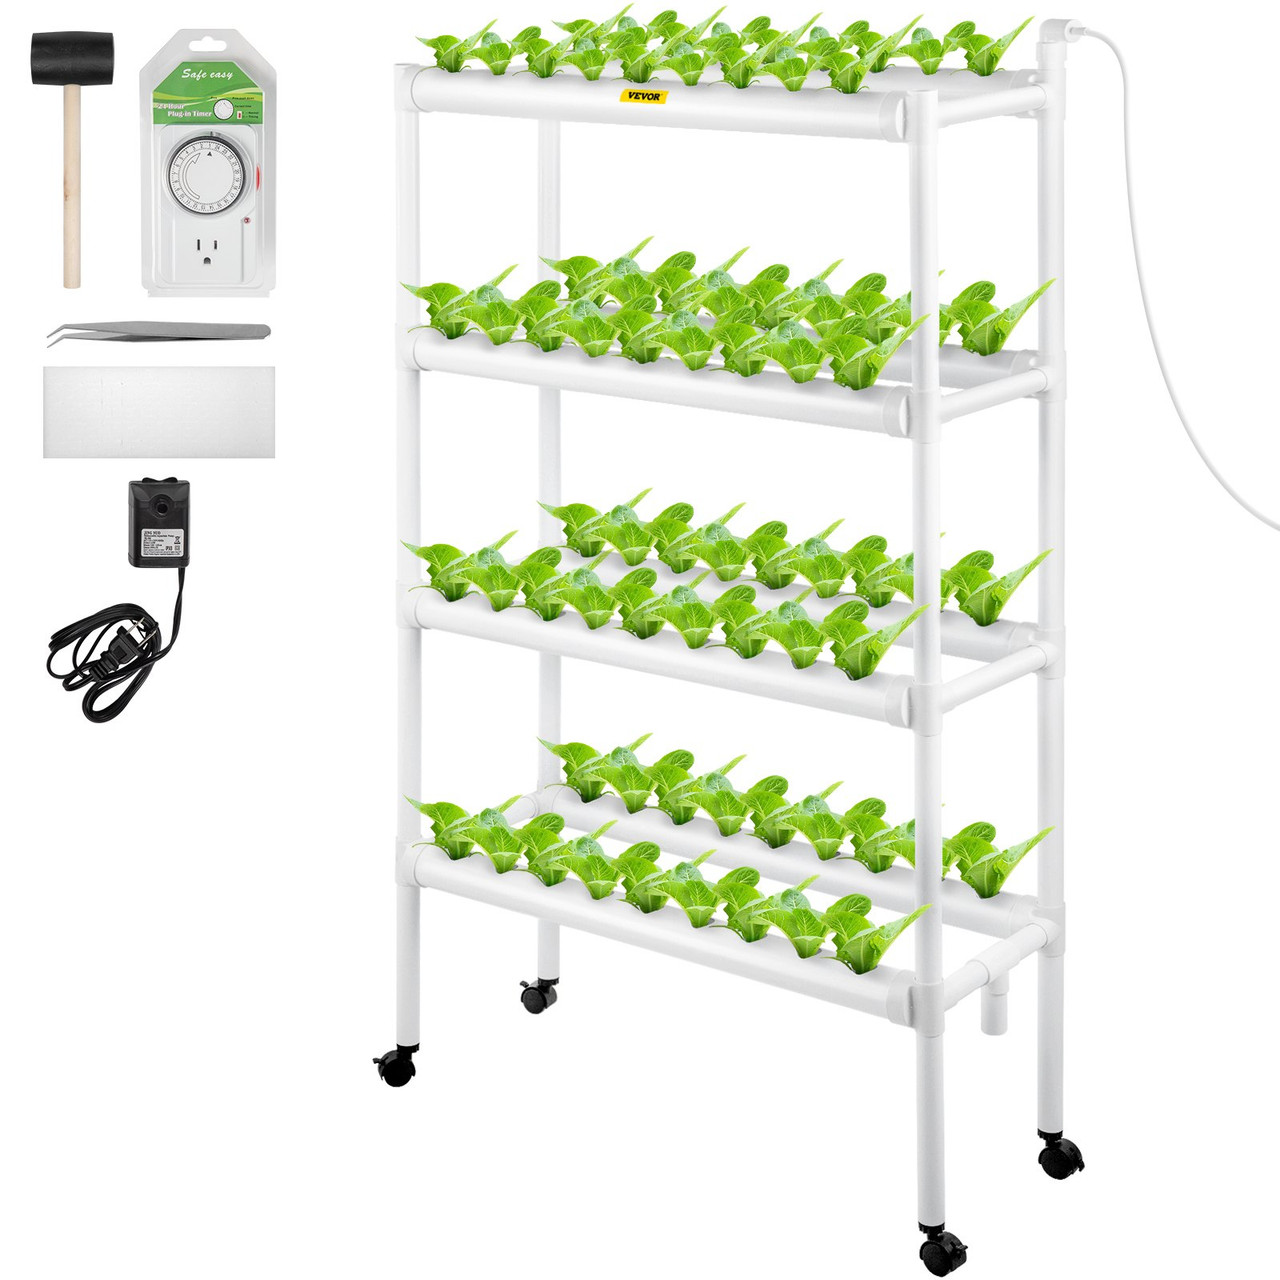 Hydroponics Growing System, 72 Sites 8 Food-Grade PVC-U Pipes, 4 Layers Indoor Planting Kit with Water Pump, Timer, Nest Basket, Sponge, for Fruits, Vegetables, Herbs, White